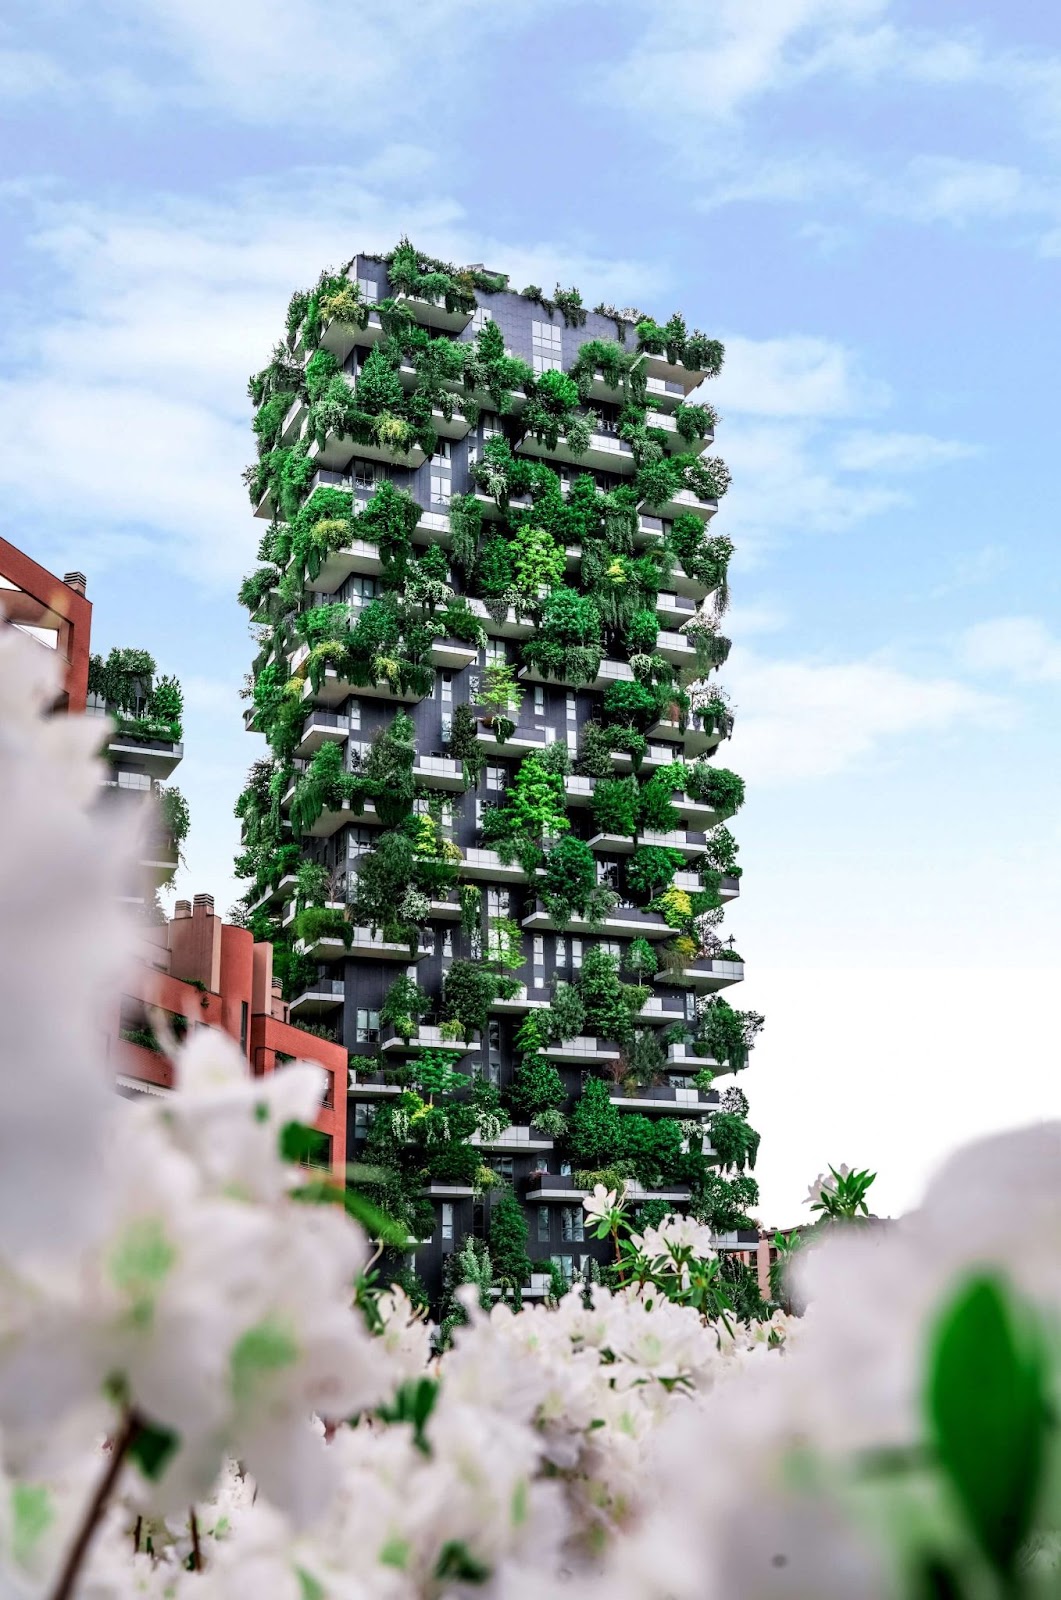 Bosco Verticale, Residential Towers, Forest Home